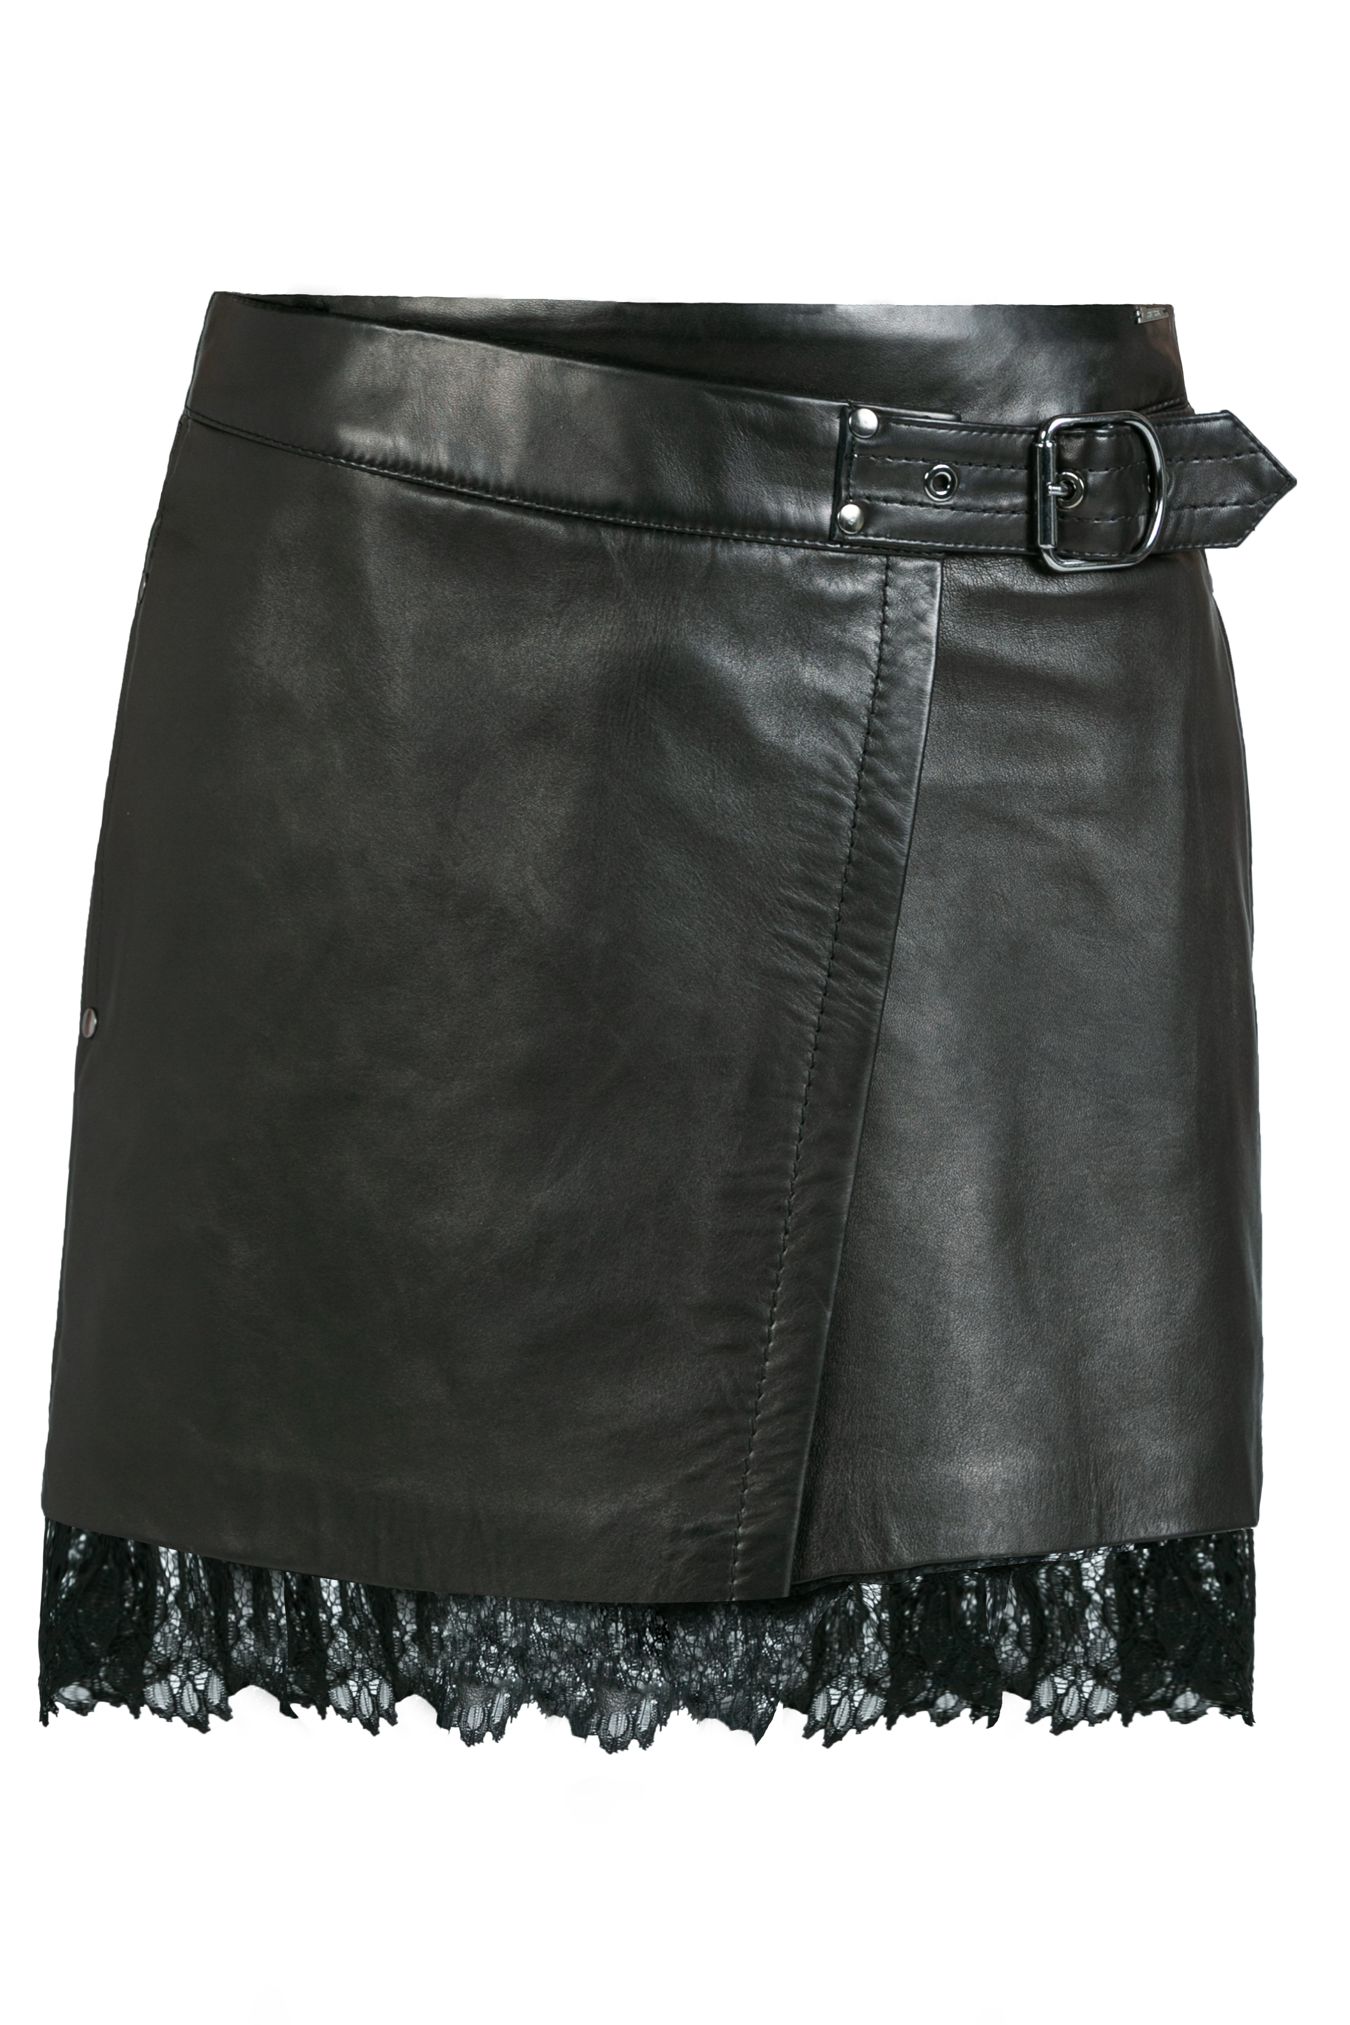 leather skirt, leather skirt ﻿with petticoat finished with lace, black leather skirt, black envelope skirt, leather mini skirt, envelope leather mini skirt